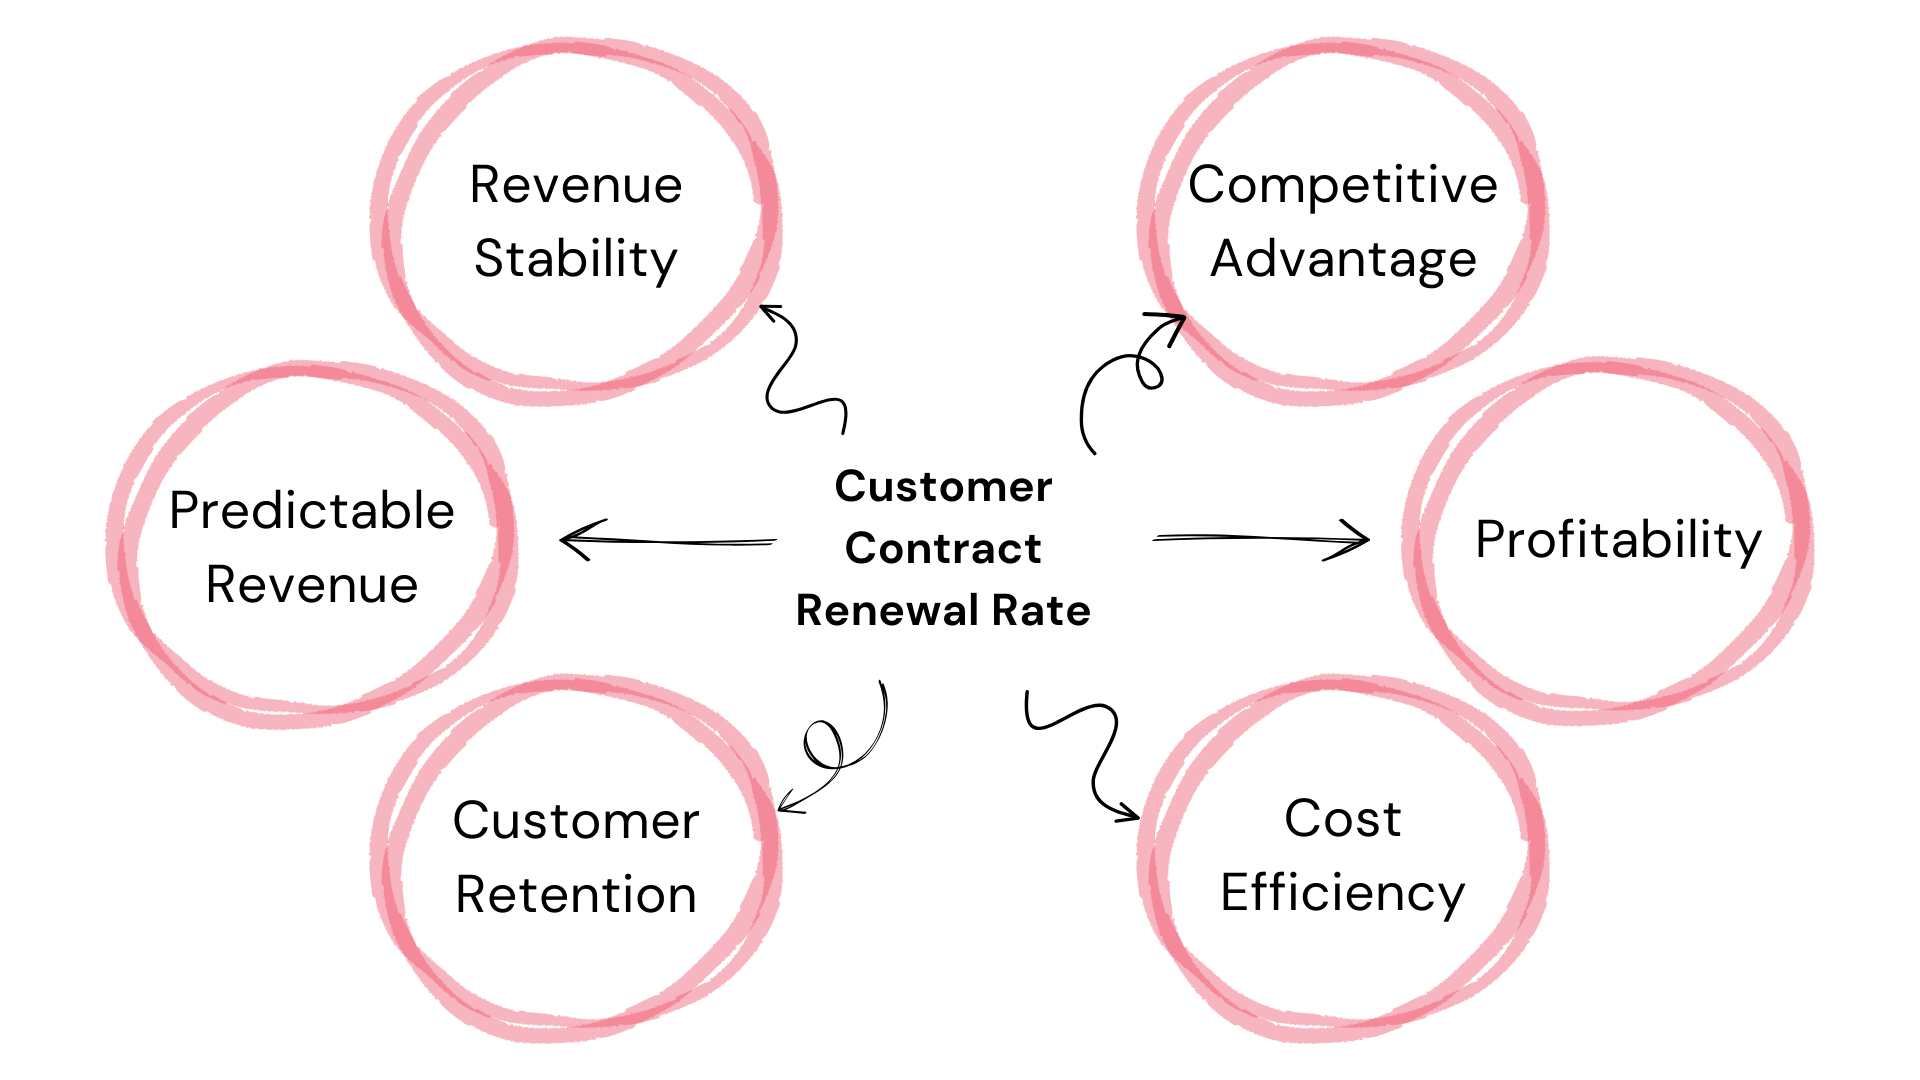 Customer contract renewal rate